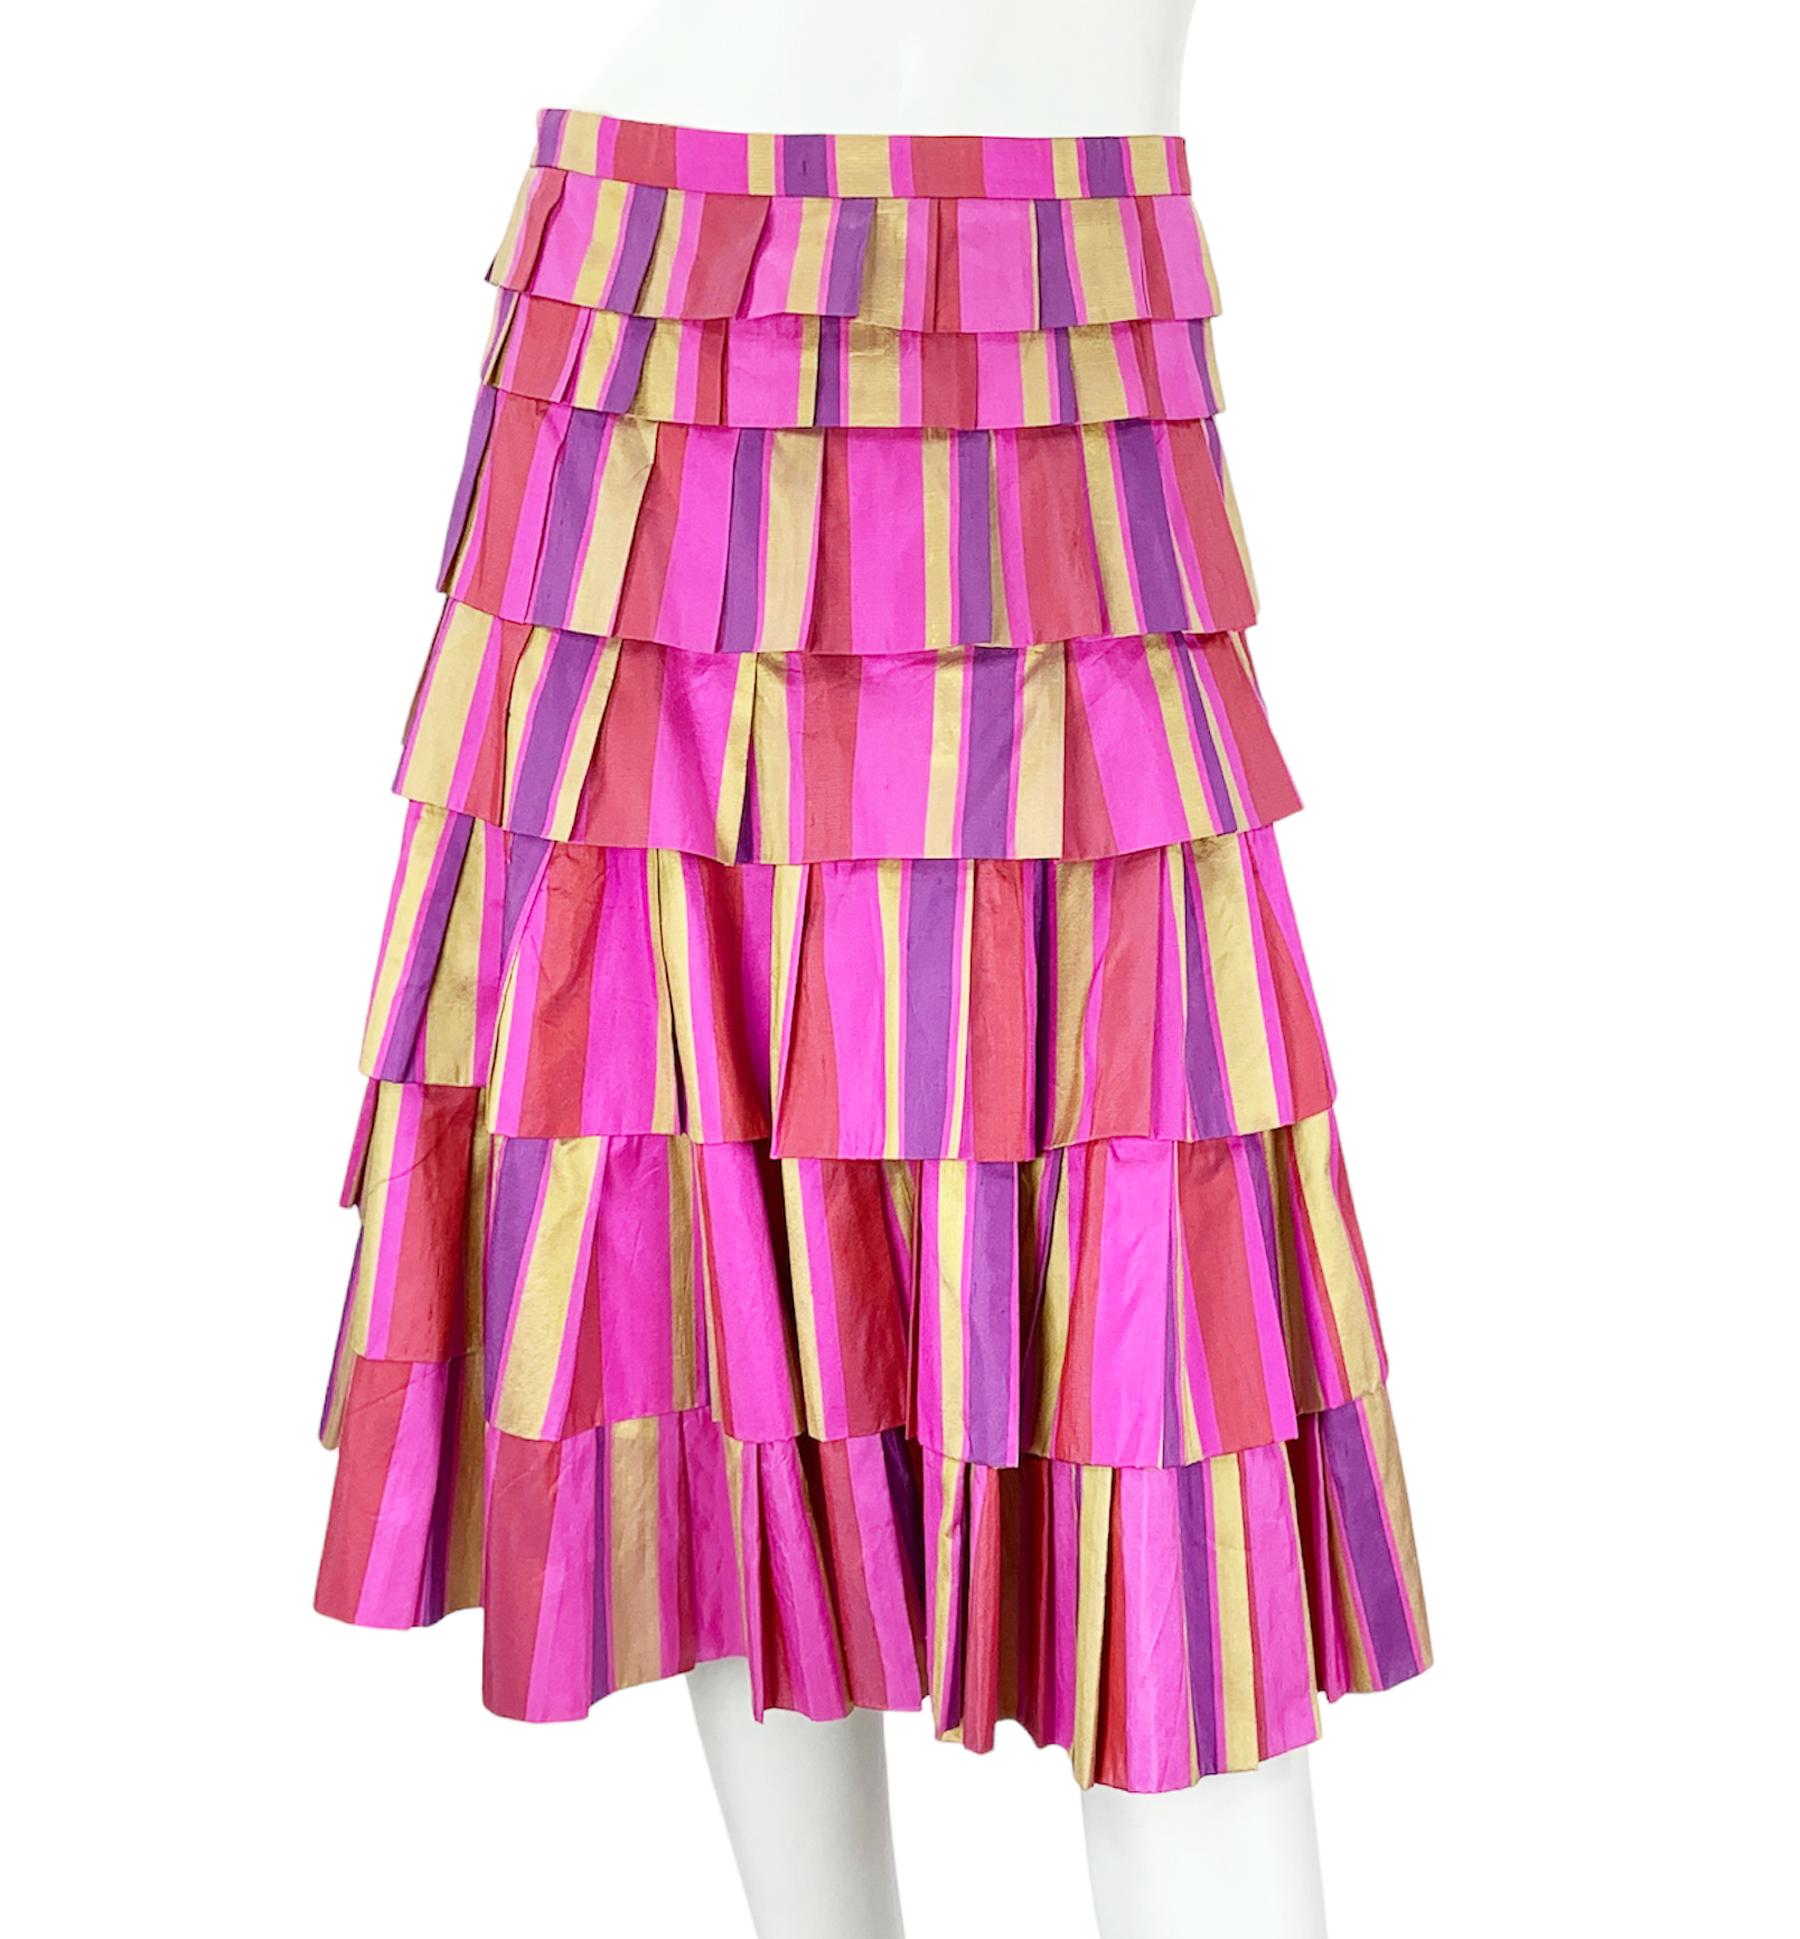 Vintage Christian Dior Taffeta Silk Layered Skirt
French size 42 ( US 10)
Colorful metallic taffeta silk, Each level double layered, Fully lined in pink silk, Zip Closure, Medium weight.
Measurements: length - 25.5 inches, waist - 30.5